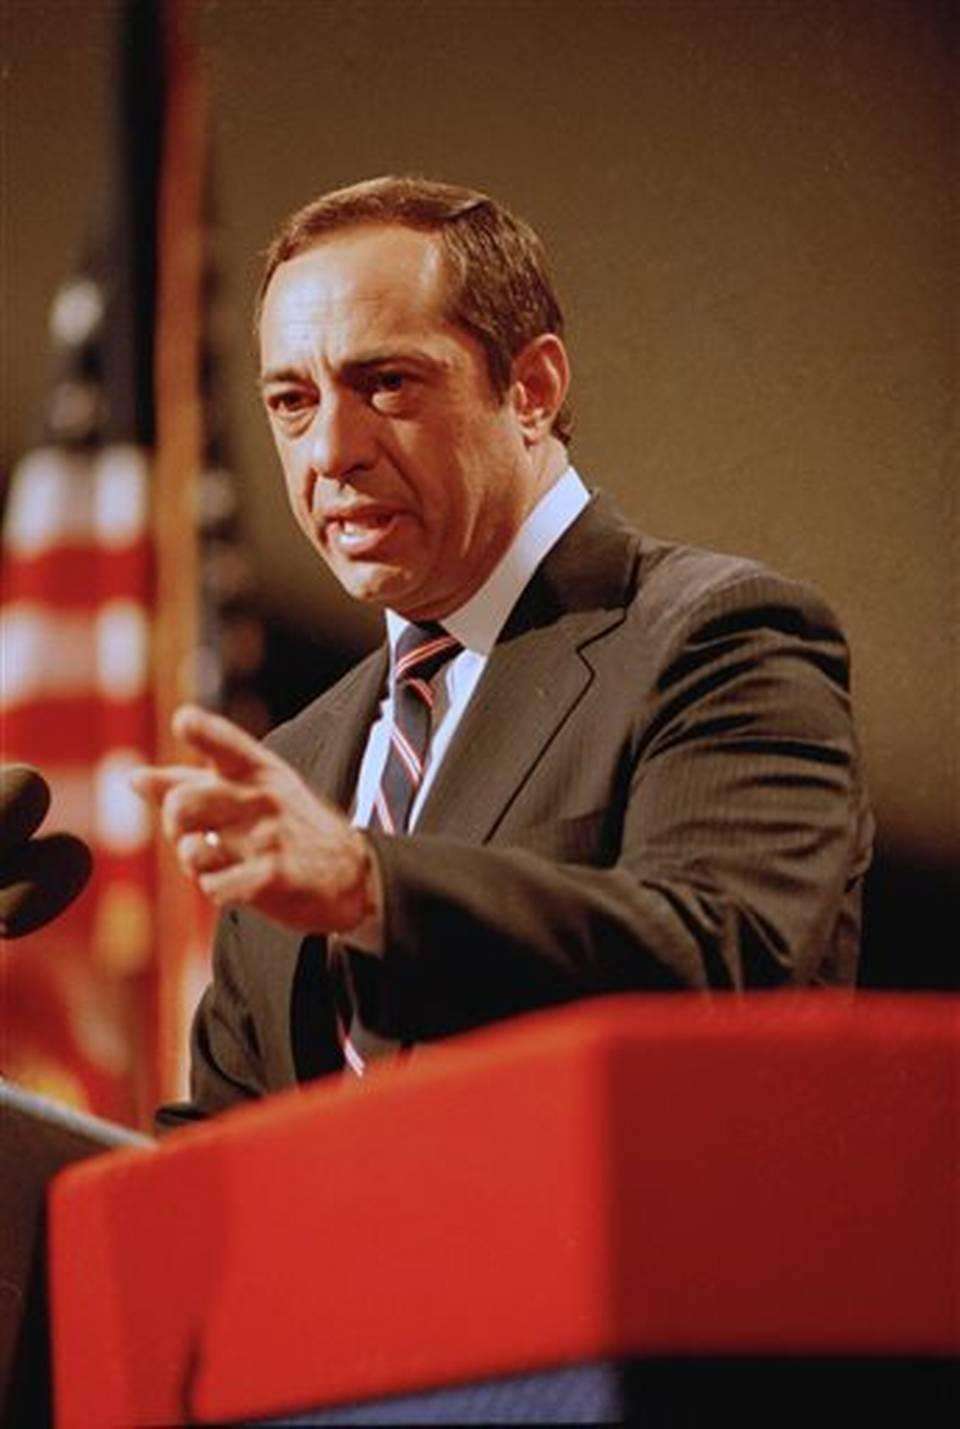 January 1, 2015 - Former New York Governor Mario Cuomo, 82, died of heart failure at his home in Manhattan. He had suffered a series of illnesses related to heart disease, including hospitalization as recently as November 2014. Cuomo served three terms as the 52nd Governor of New York, from 1983-1994. At the 1984 Democratic National Convention, he famously criticized Ronald Reagan's policies during his keynote speech, drawing national attention and recognition for his liberal views. He was considered a front-runner for the Democratic nomination for President in both 1988 and 1992, but he declined to seek nomination.

Cuomo leaves behind his wife, Matilda, to whom he was married for 60 years, and five children. His son, Andrew, was sworn in to his second term as the Governor of New York just hours before Cuomo's passing.